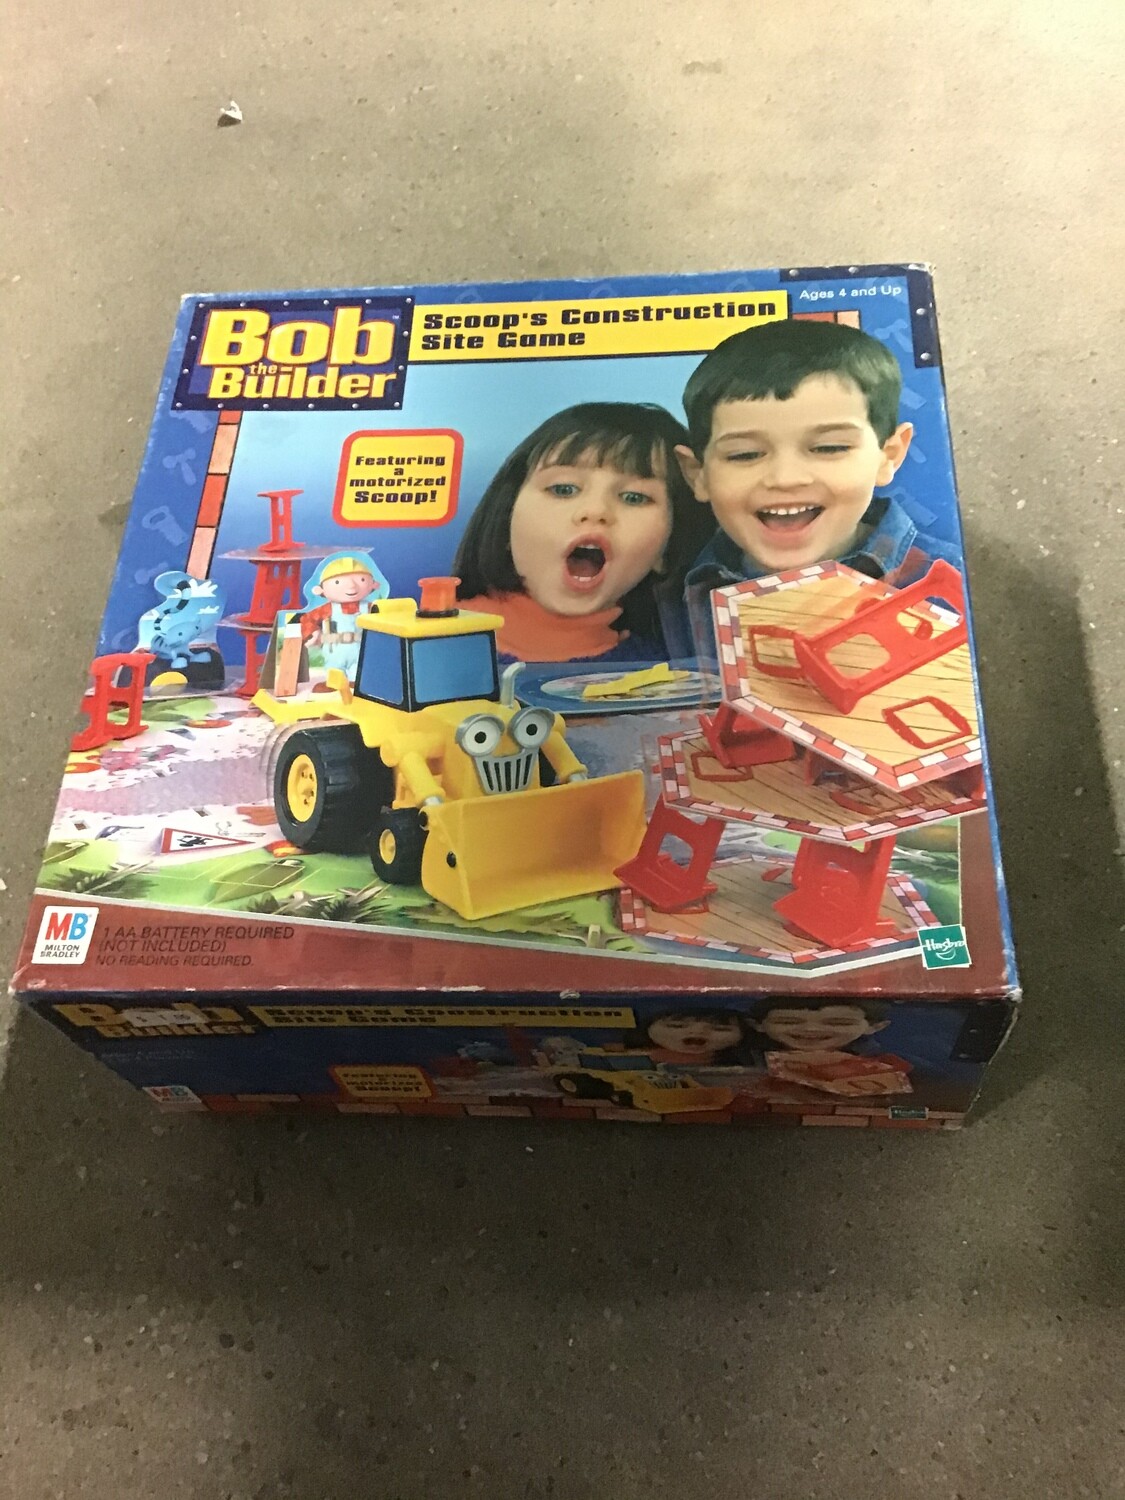 Bob the Builder toy